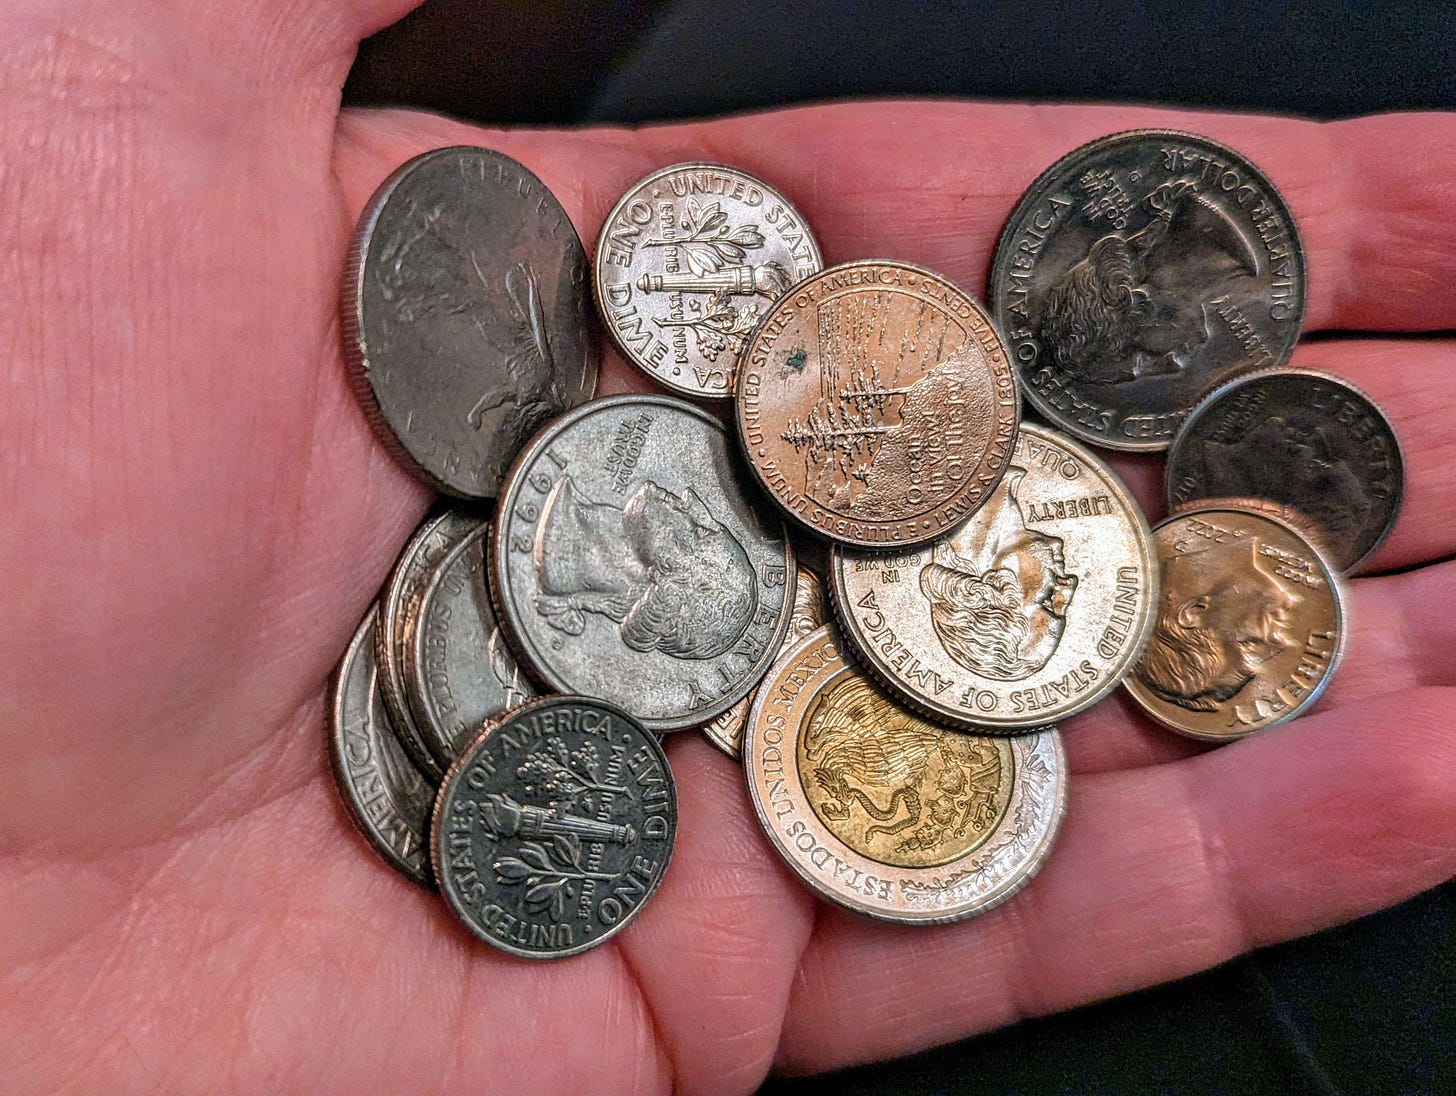 closeup of coins in hand